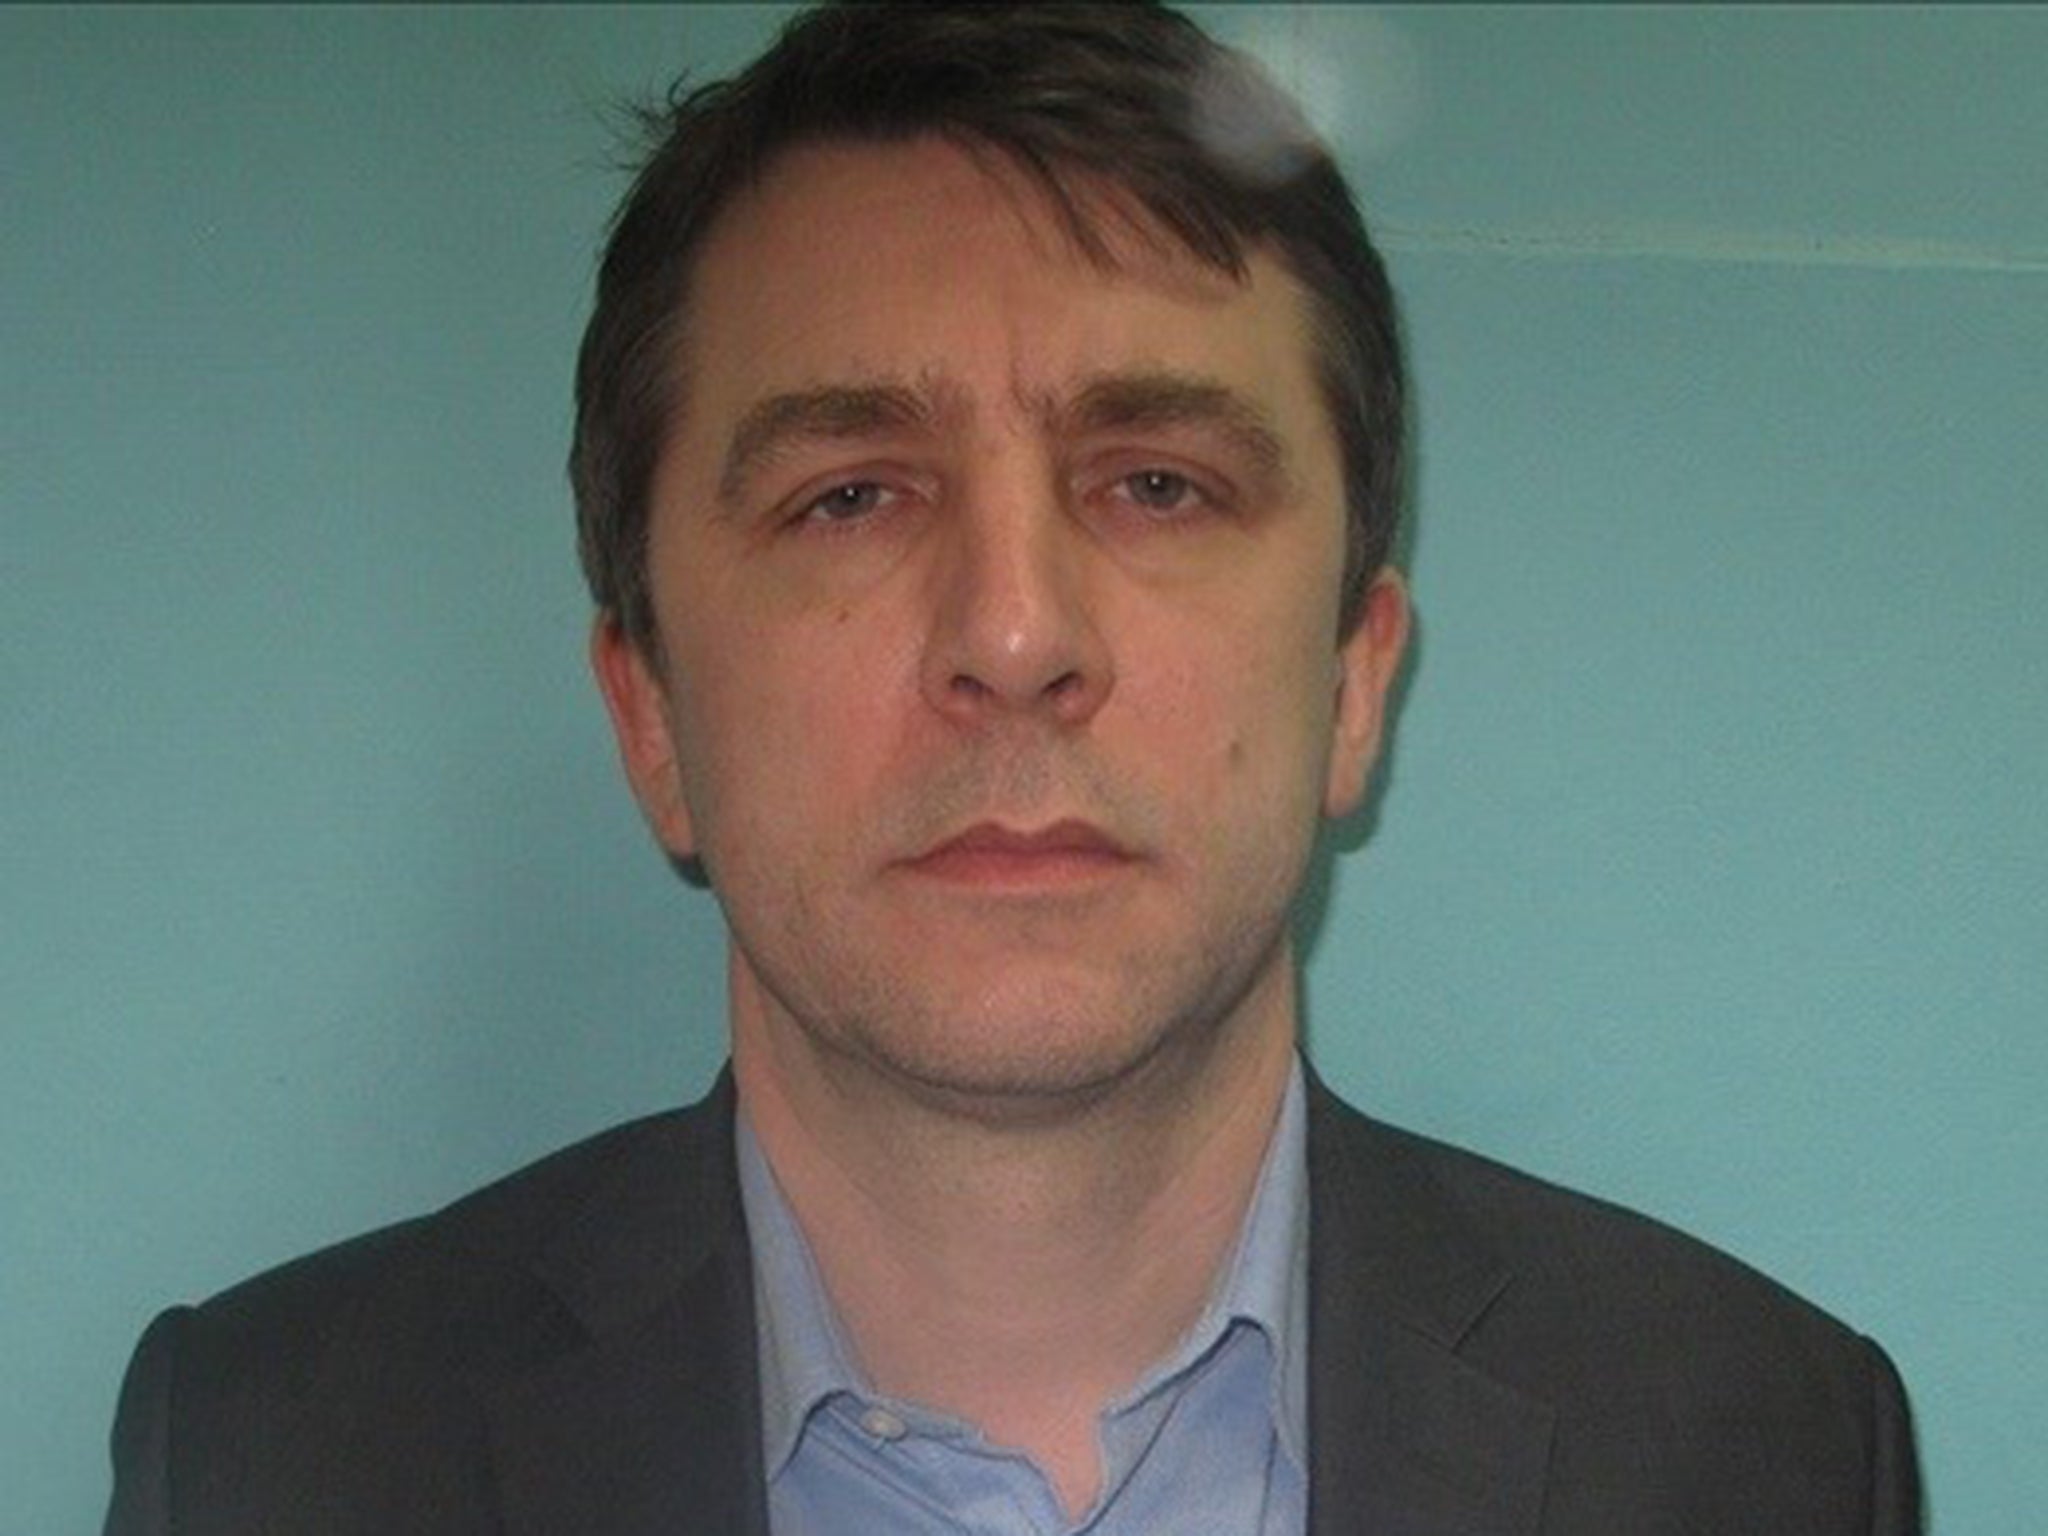 Mathew Law was convicted following a two-week trial at Bristol Crown Court